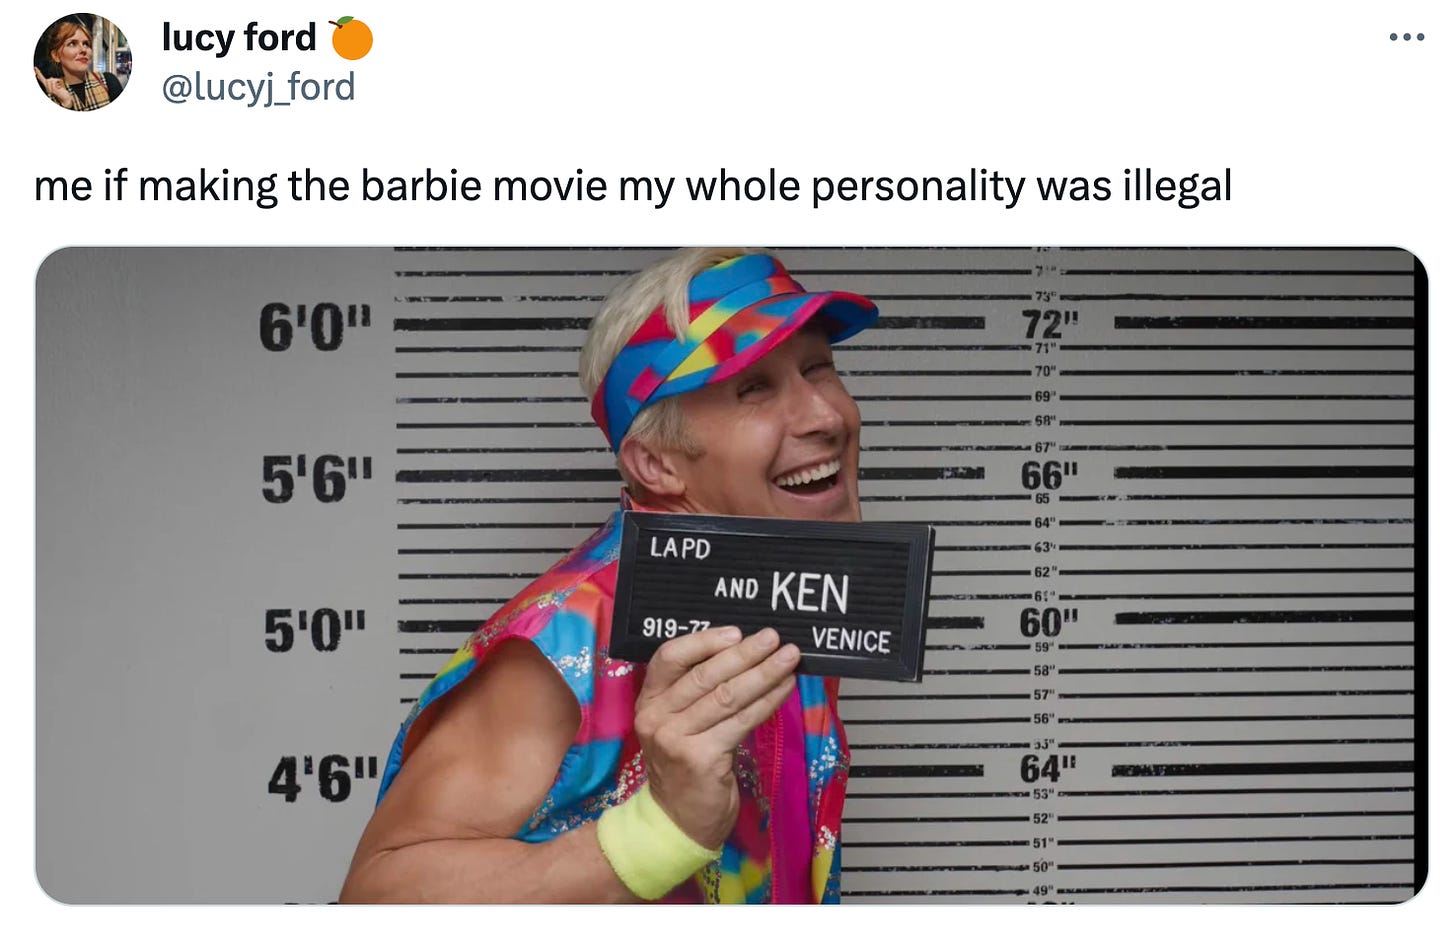 A tweet from Lucy Ford. It shows Ken’s police photograph from the Barbie movie. He’s grinning delightedly, wearing a neon visor and sweat bands. The mugshot board gives his name as “And Ken.” Lucy’s caption reads: "me if making the barbie movie my whole personality was illegal.”